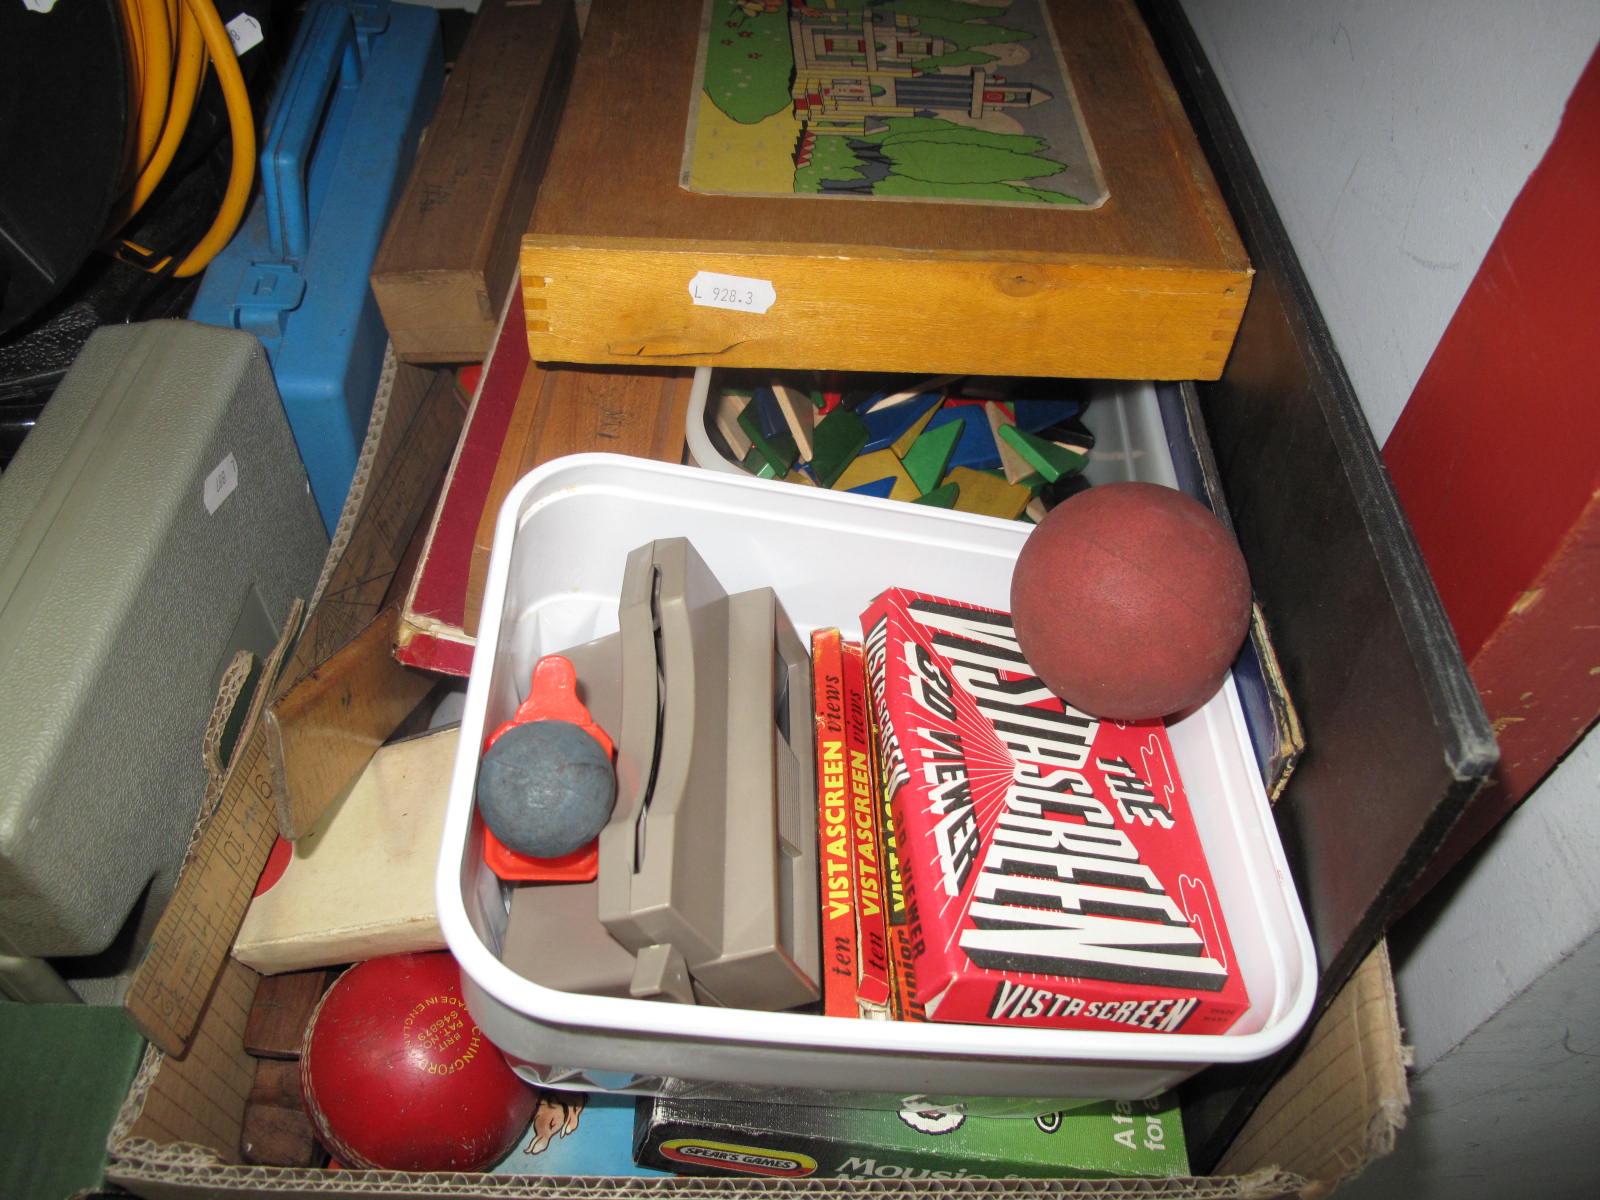 Vintage Marbles, vista screen, cricket ball, board games, wooden building blocks and other